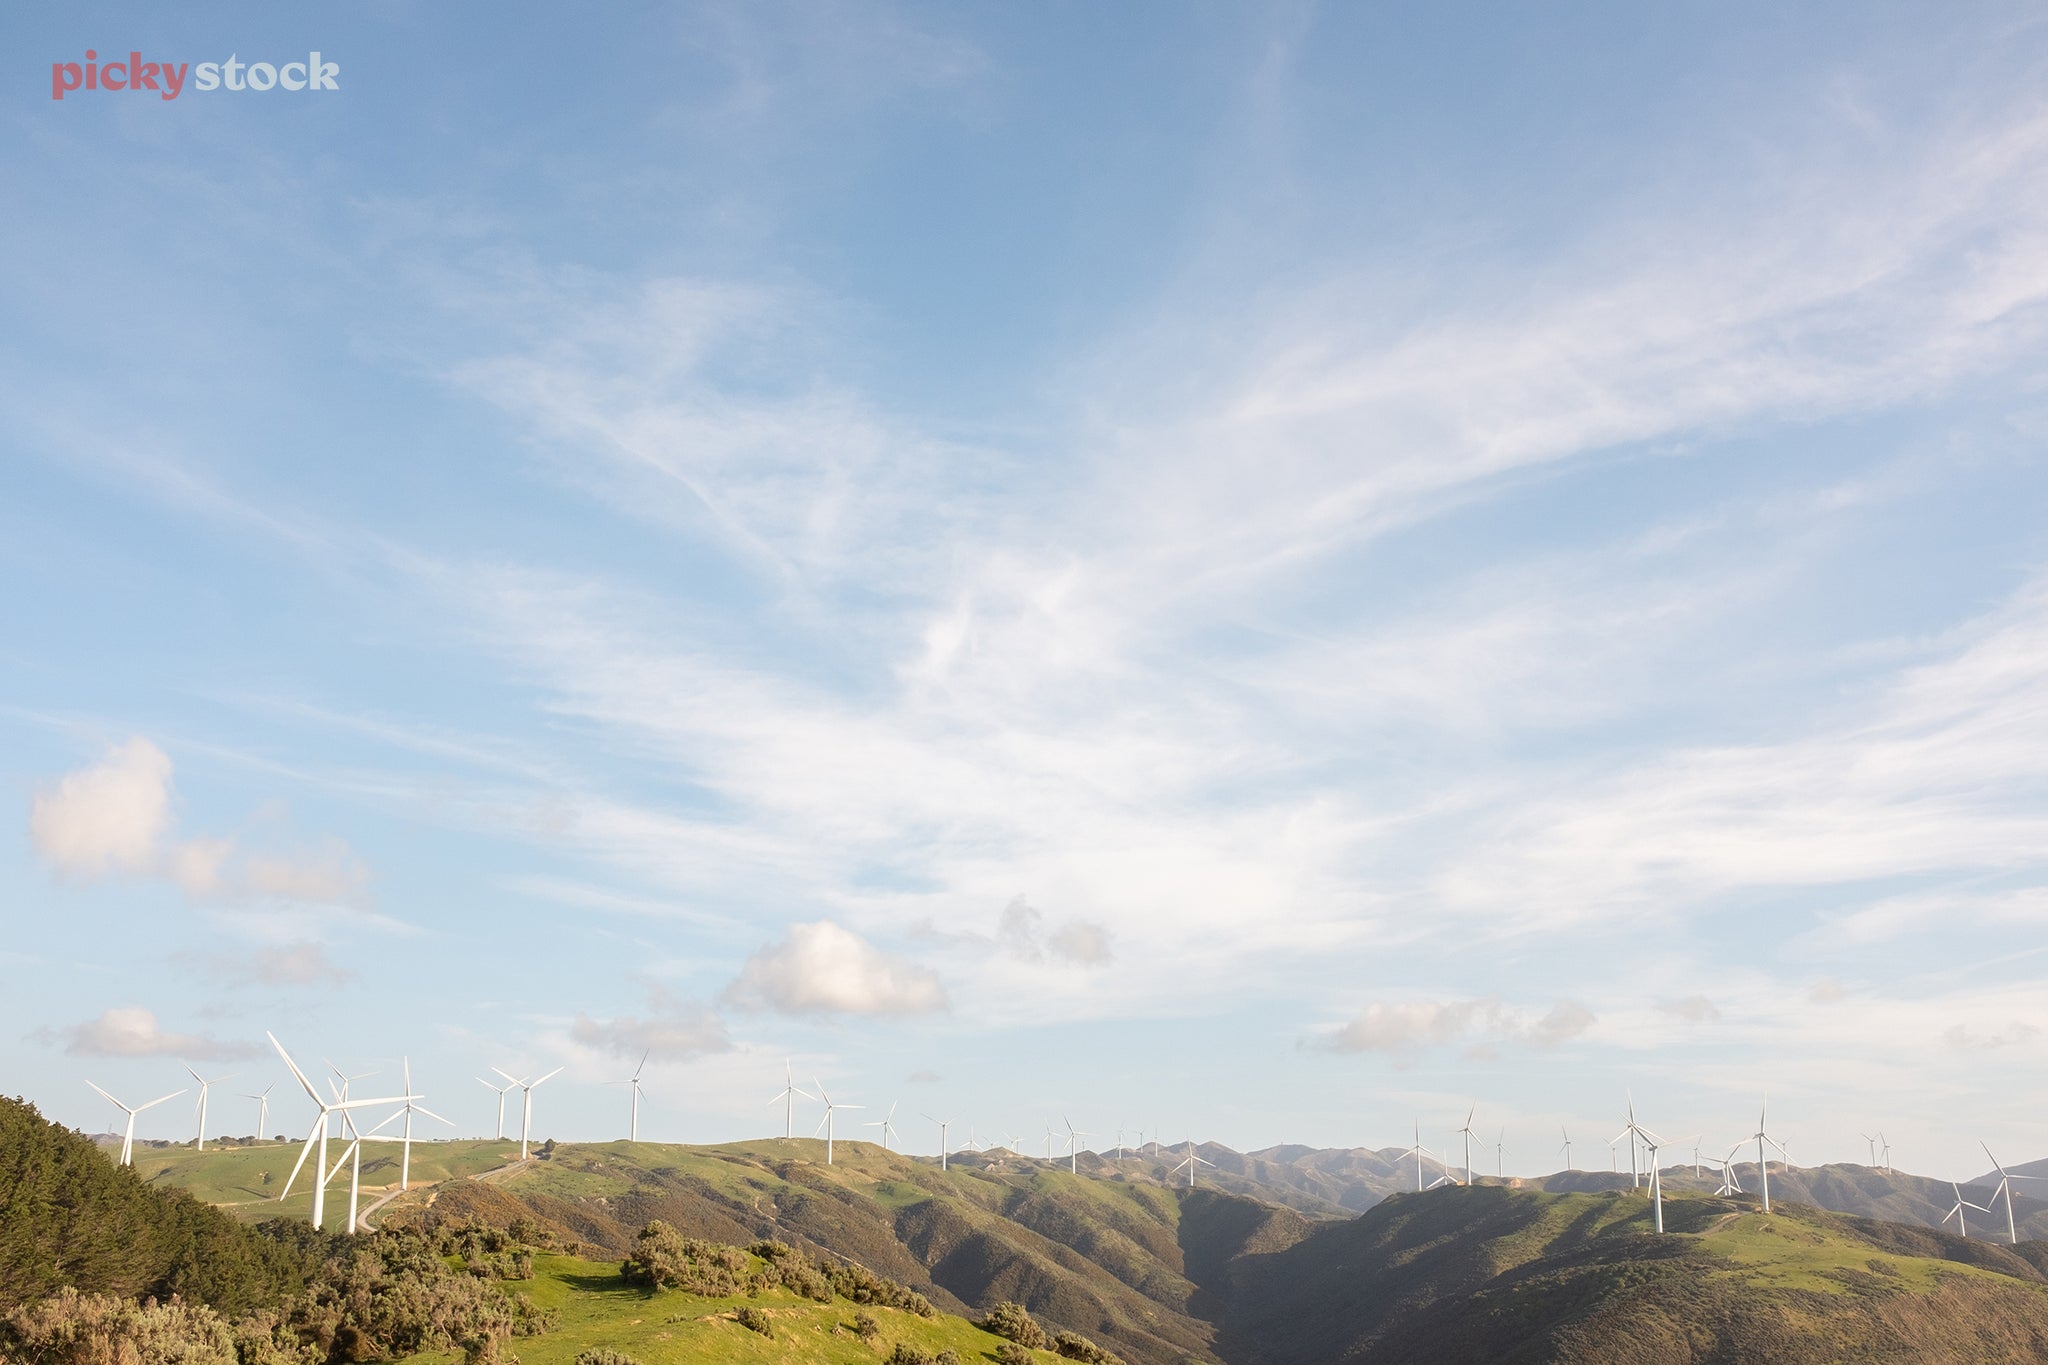 Looking out over a vast wind farm, with turbines peppered between the rolling hills against soft light.